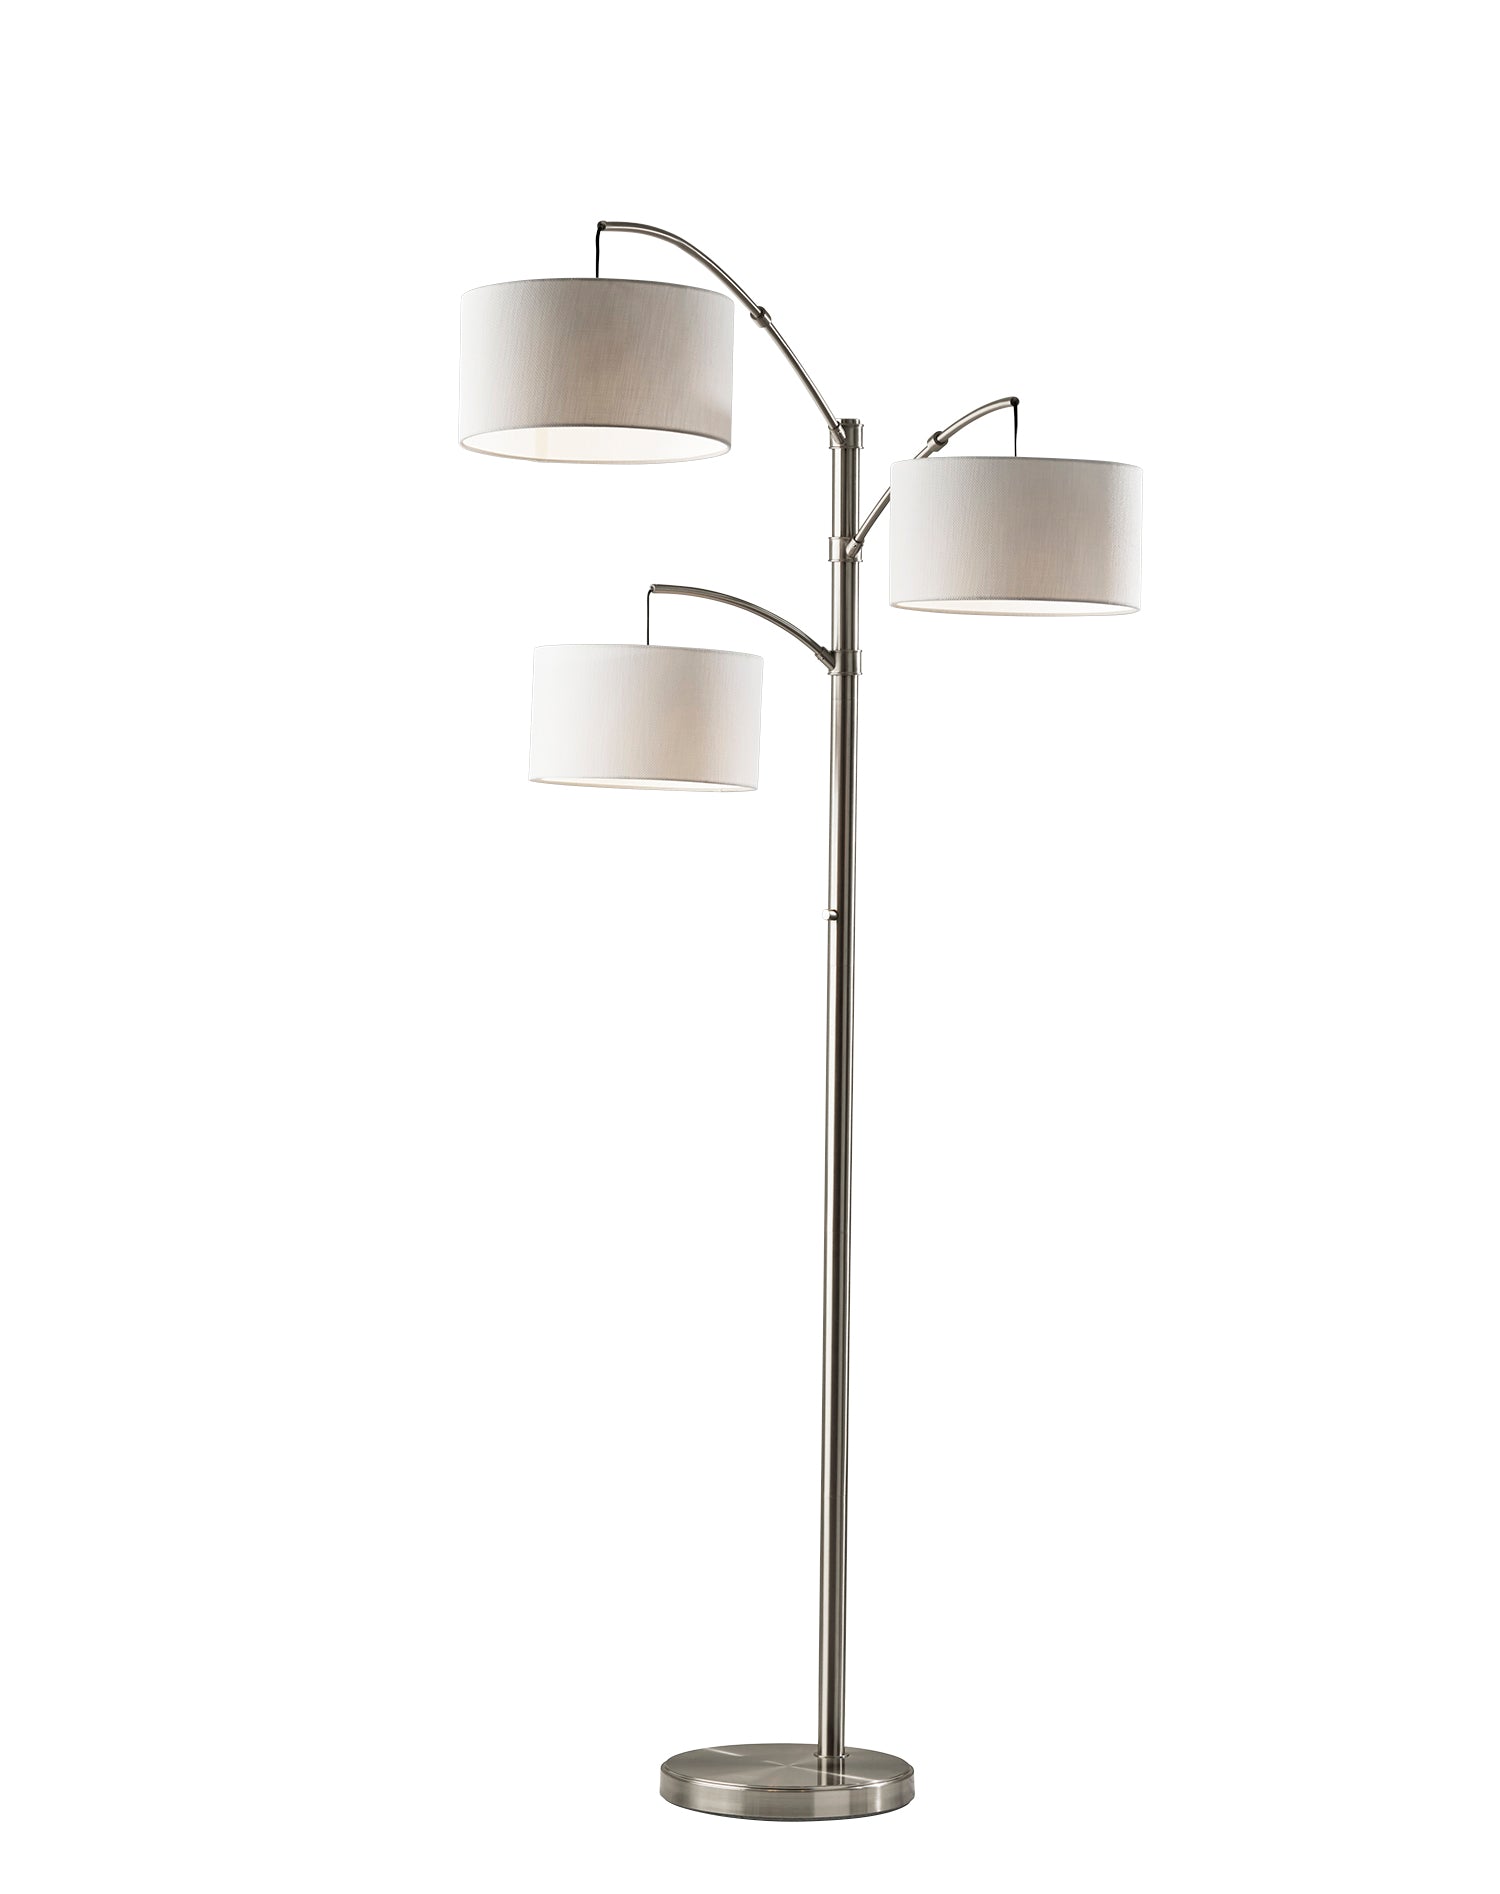 CABO Floor lamp Stainless steel - 4159-22 | ADESSO